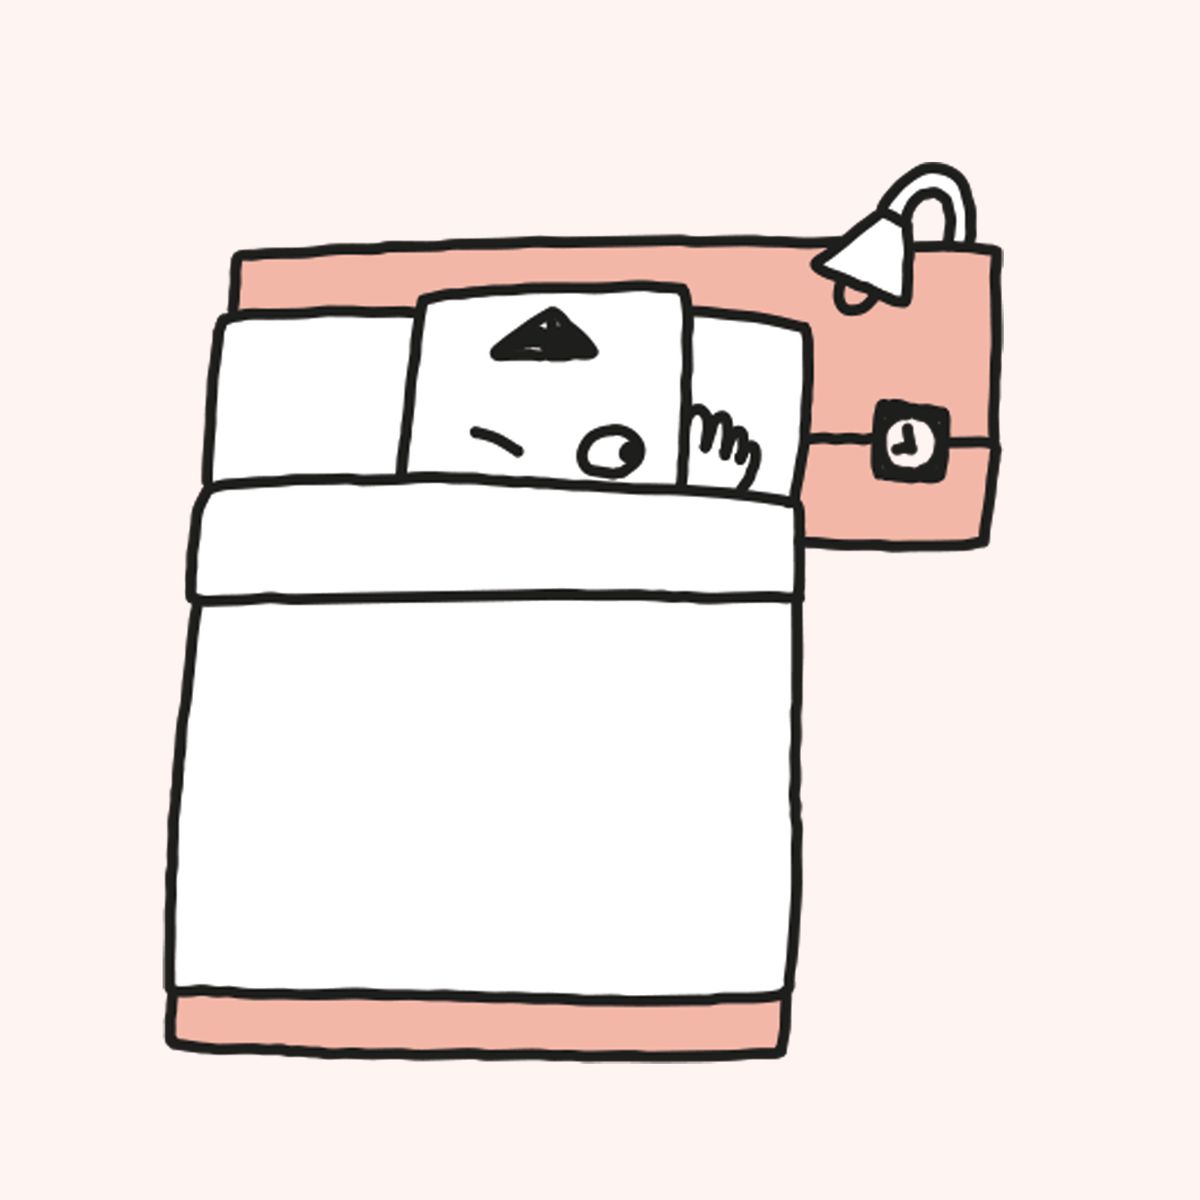 Illustration of a person sleeping in a hotel bed